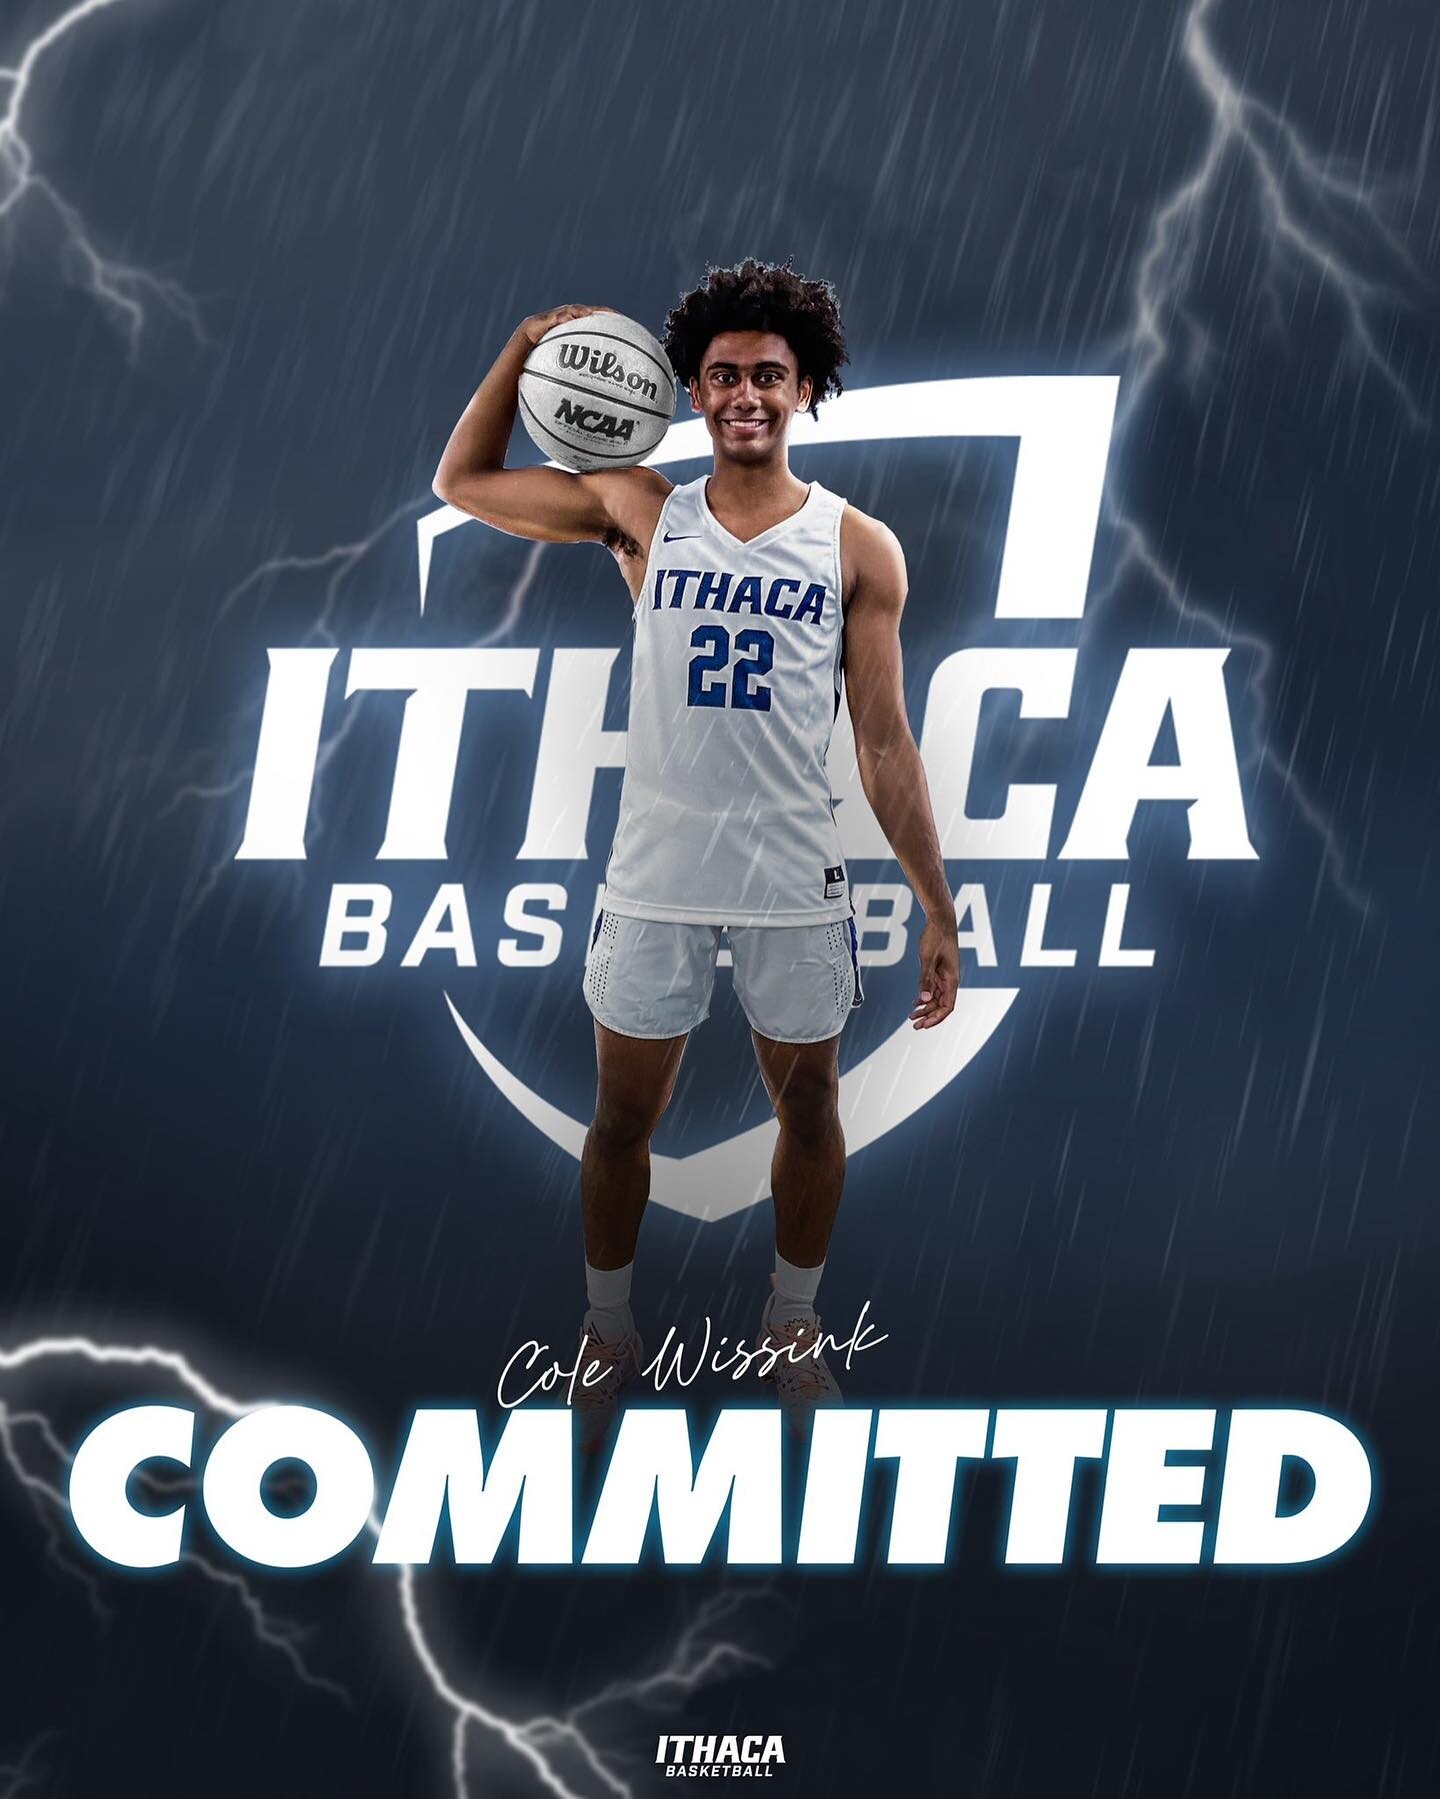 Shout out to PTT and Cheshire Academy&rsquo;s Cole Wissink on his commitment to Ithaca College.  Great school and fit.  We couldn&rsquo;t be happier and all very proud, Ithaca is getting a special kid💪 #PTTfam #Worker #obsessprocess